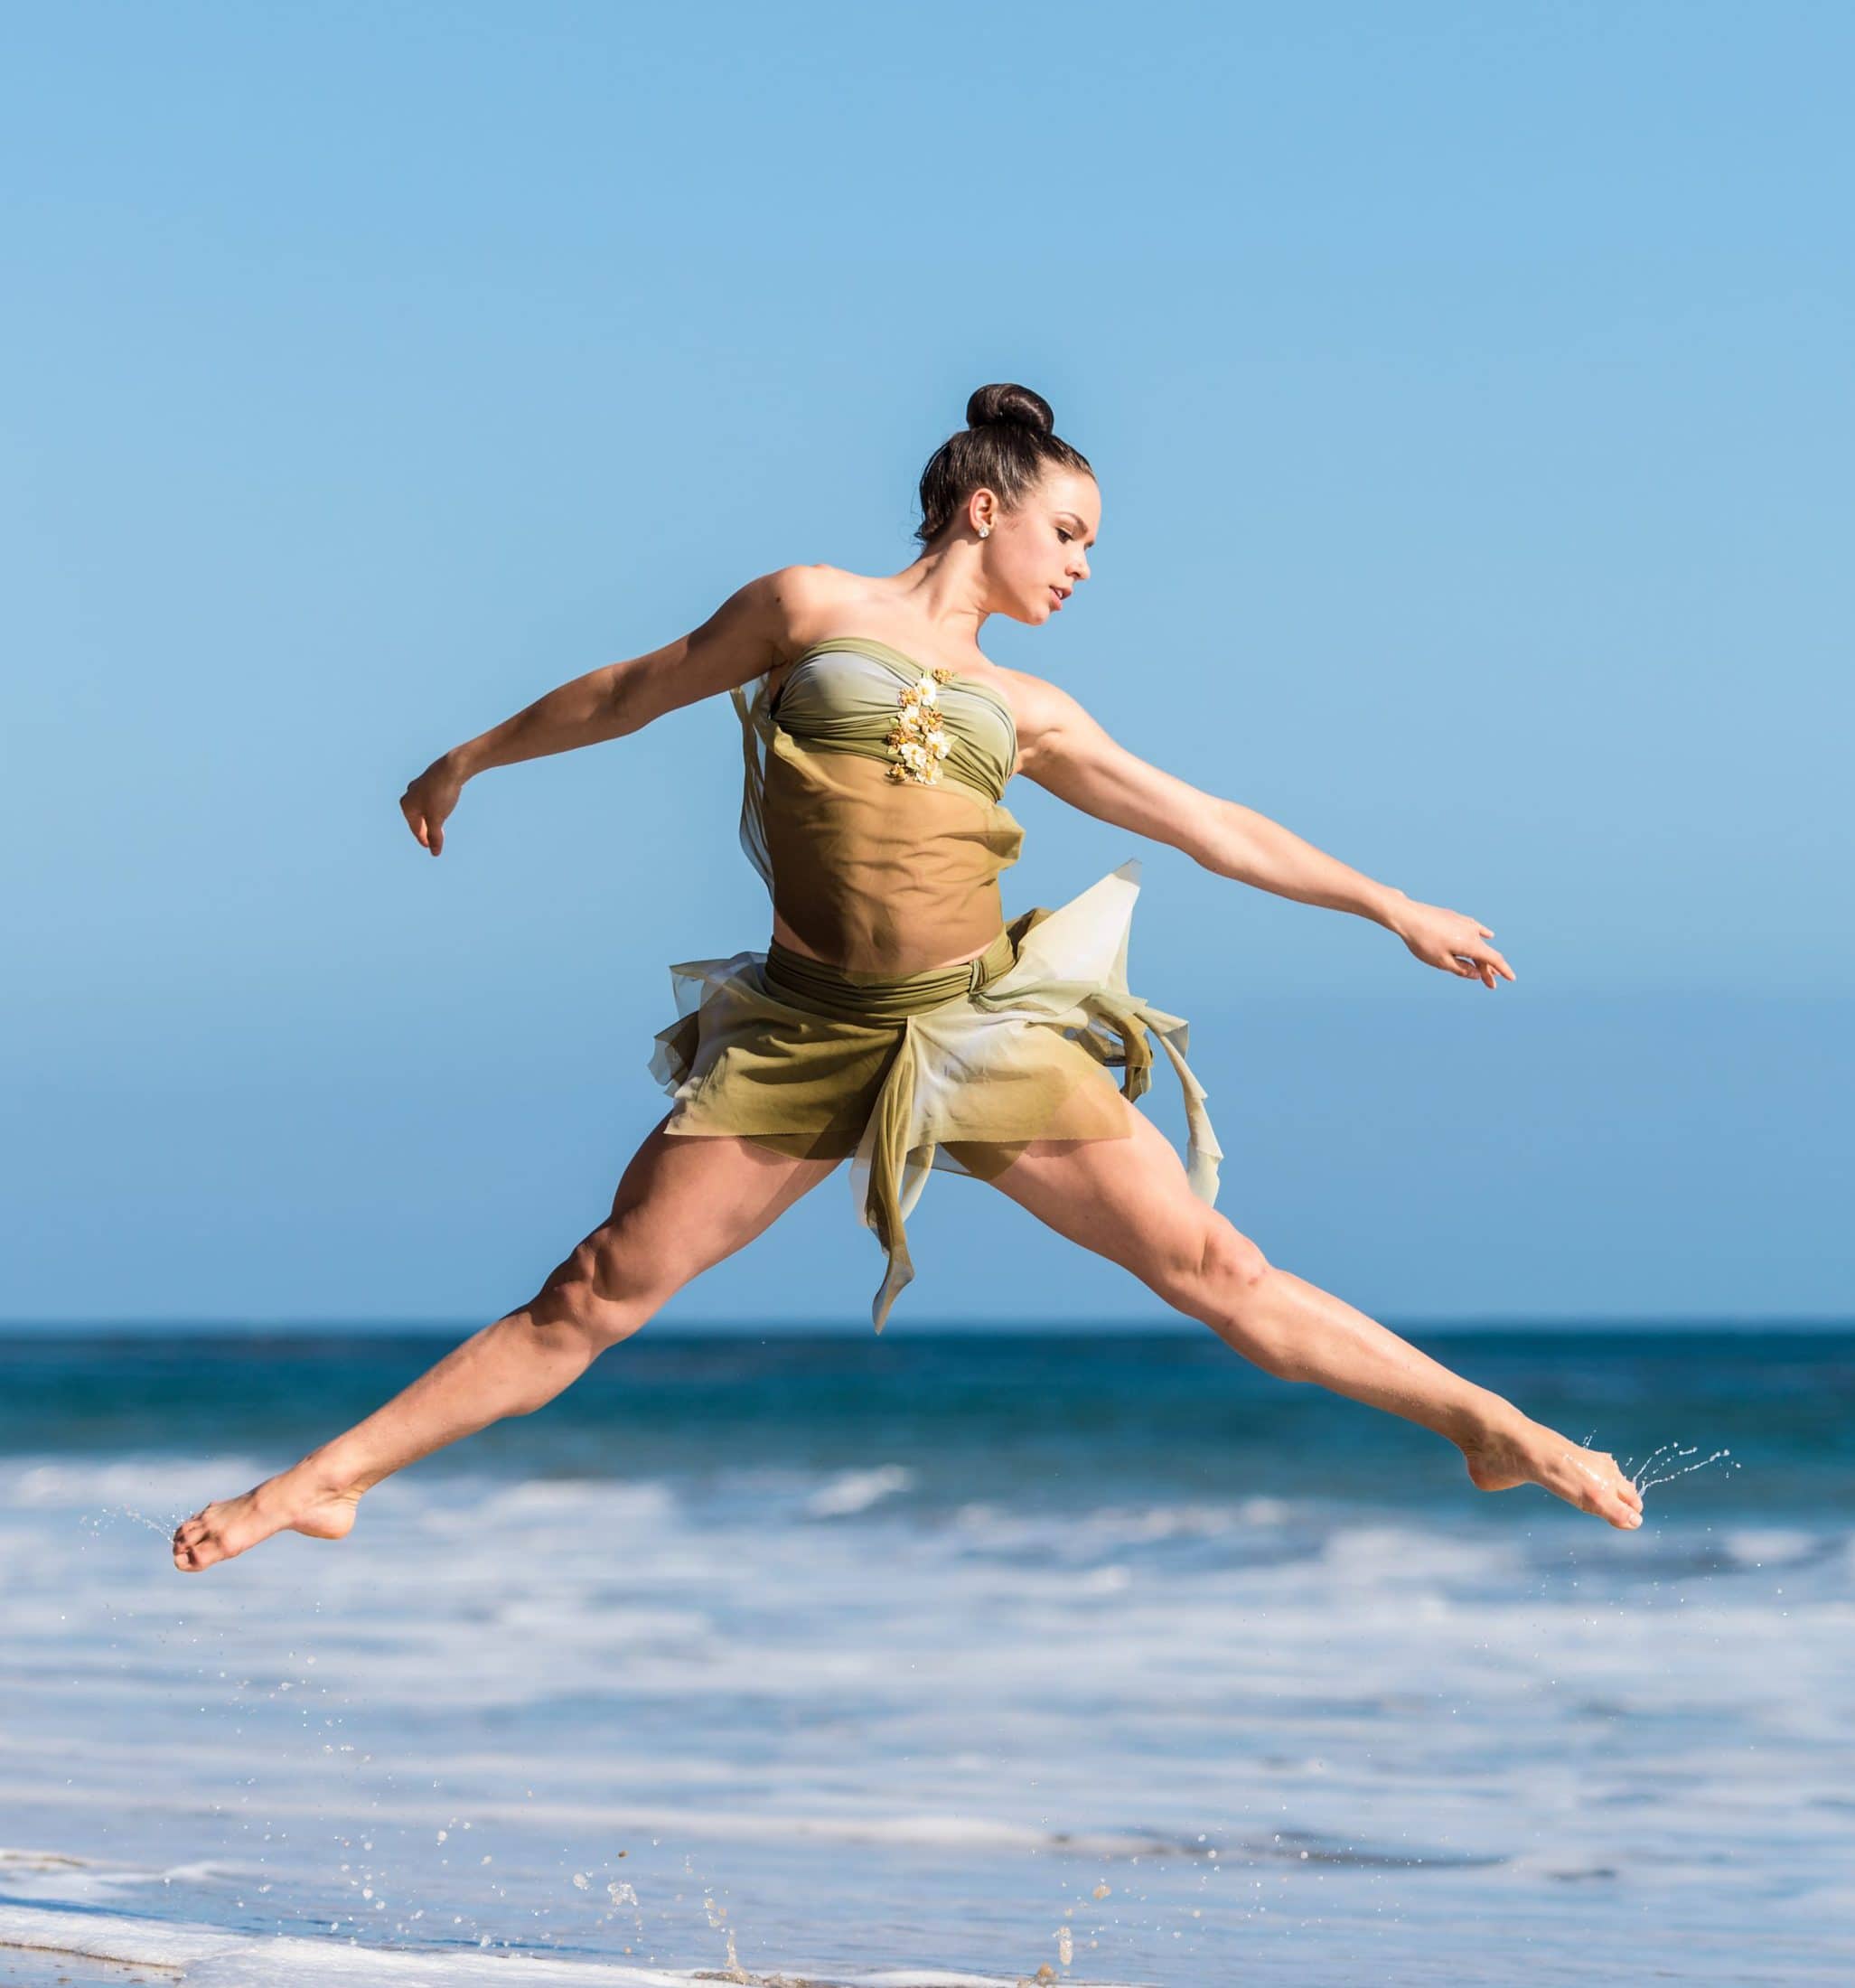 woman dancing beside body of water during daytime